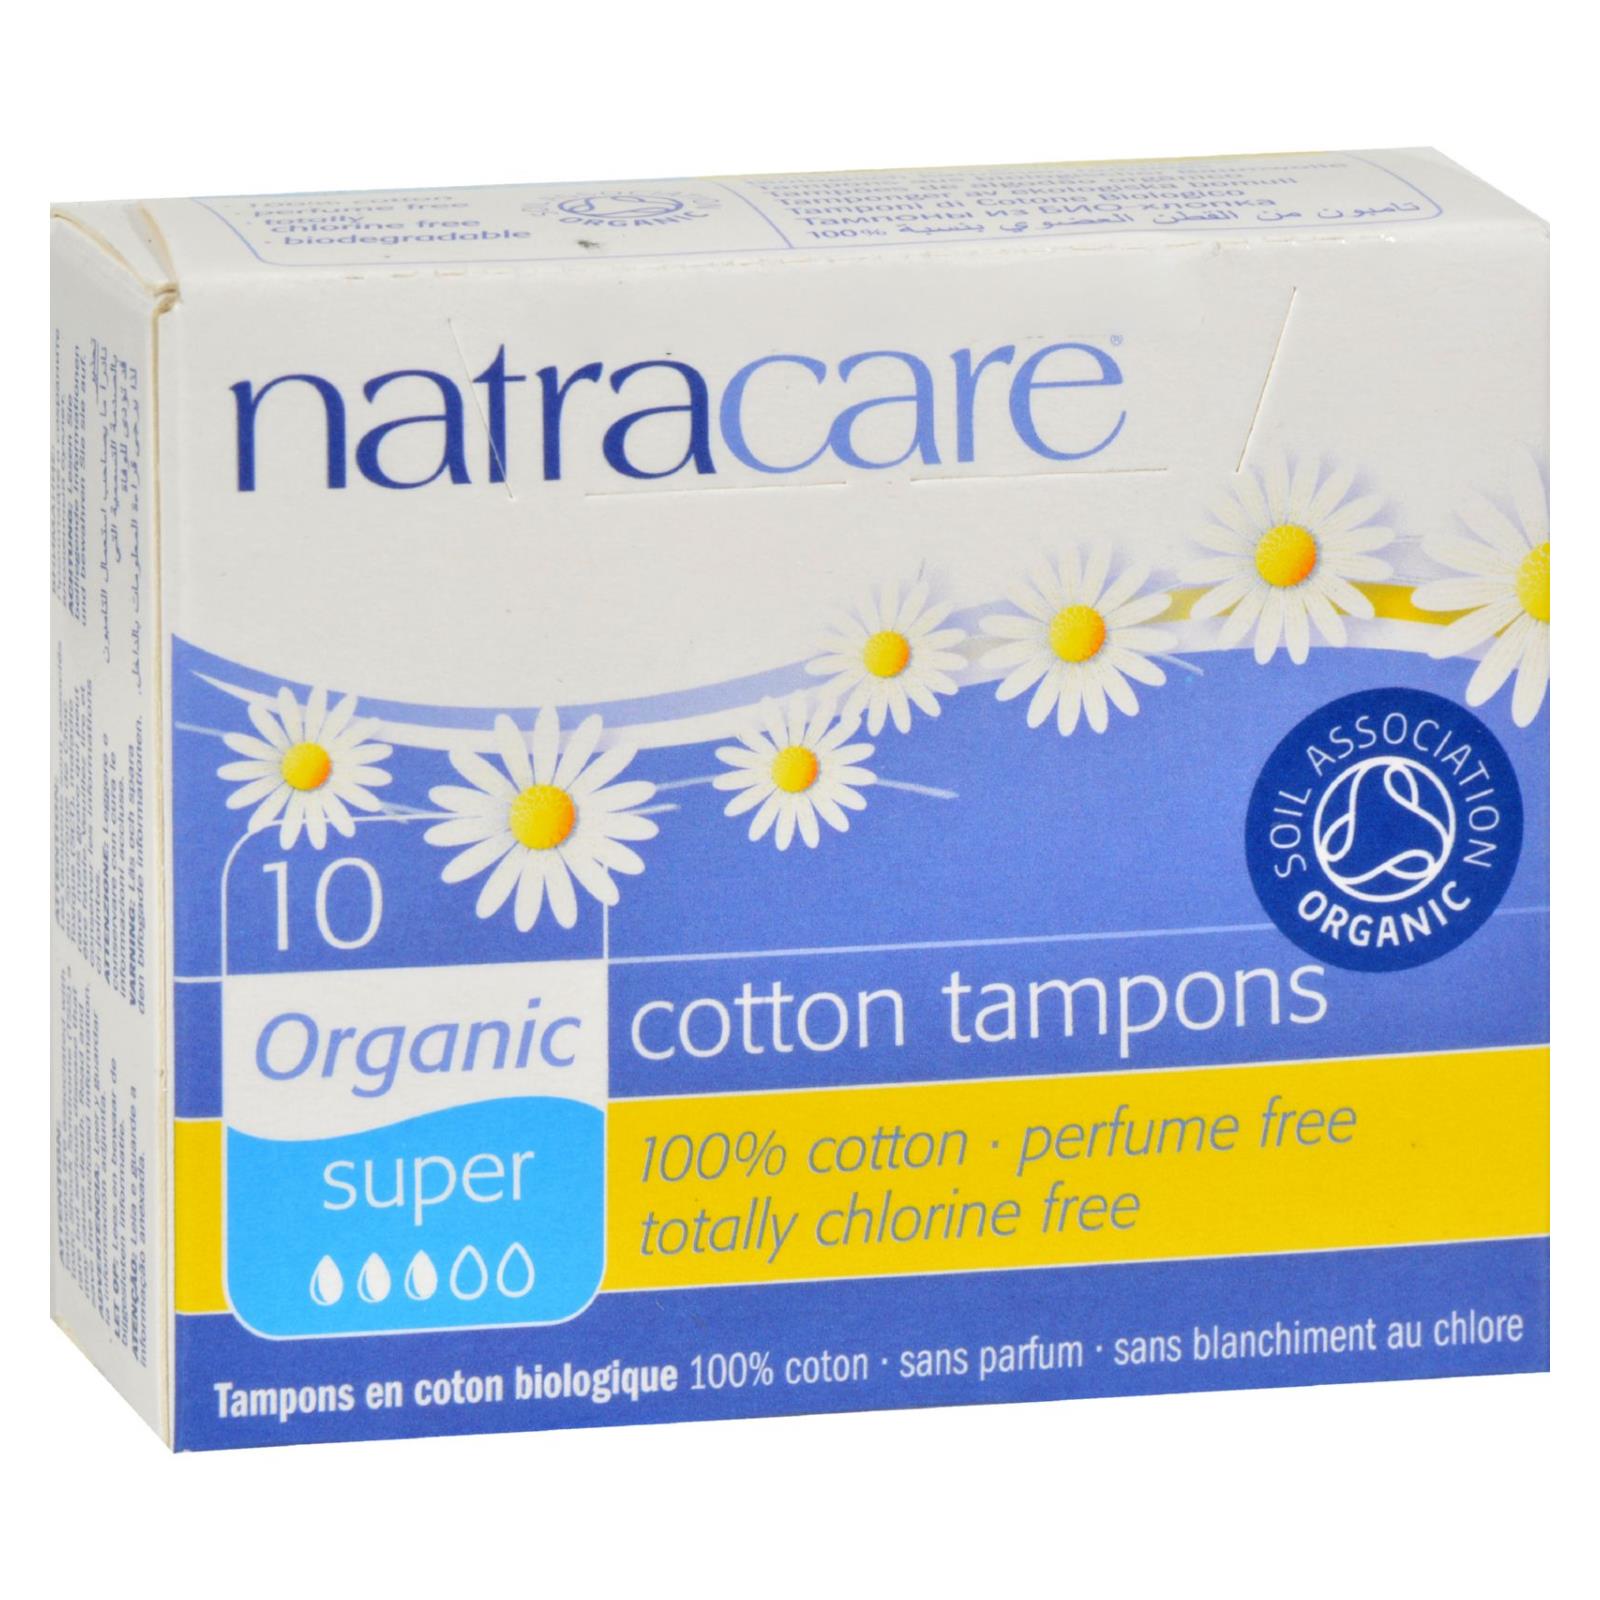 Natracare 100% Organic Cotton Tampons - Super - 10 Pack